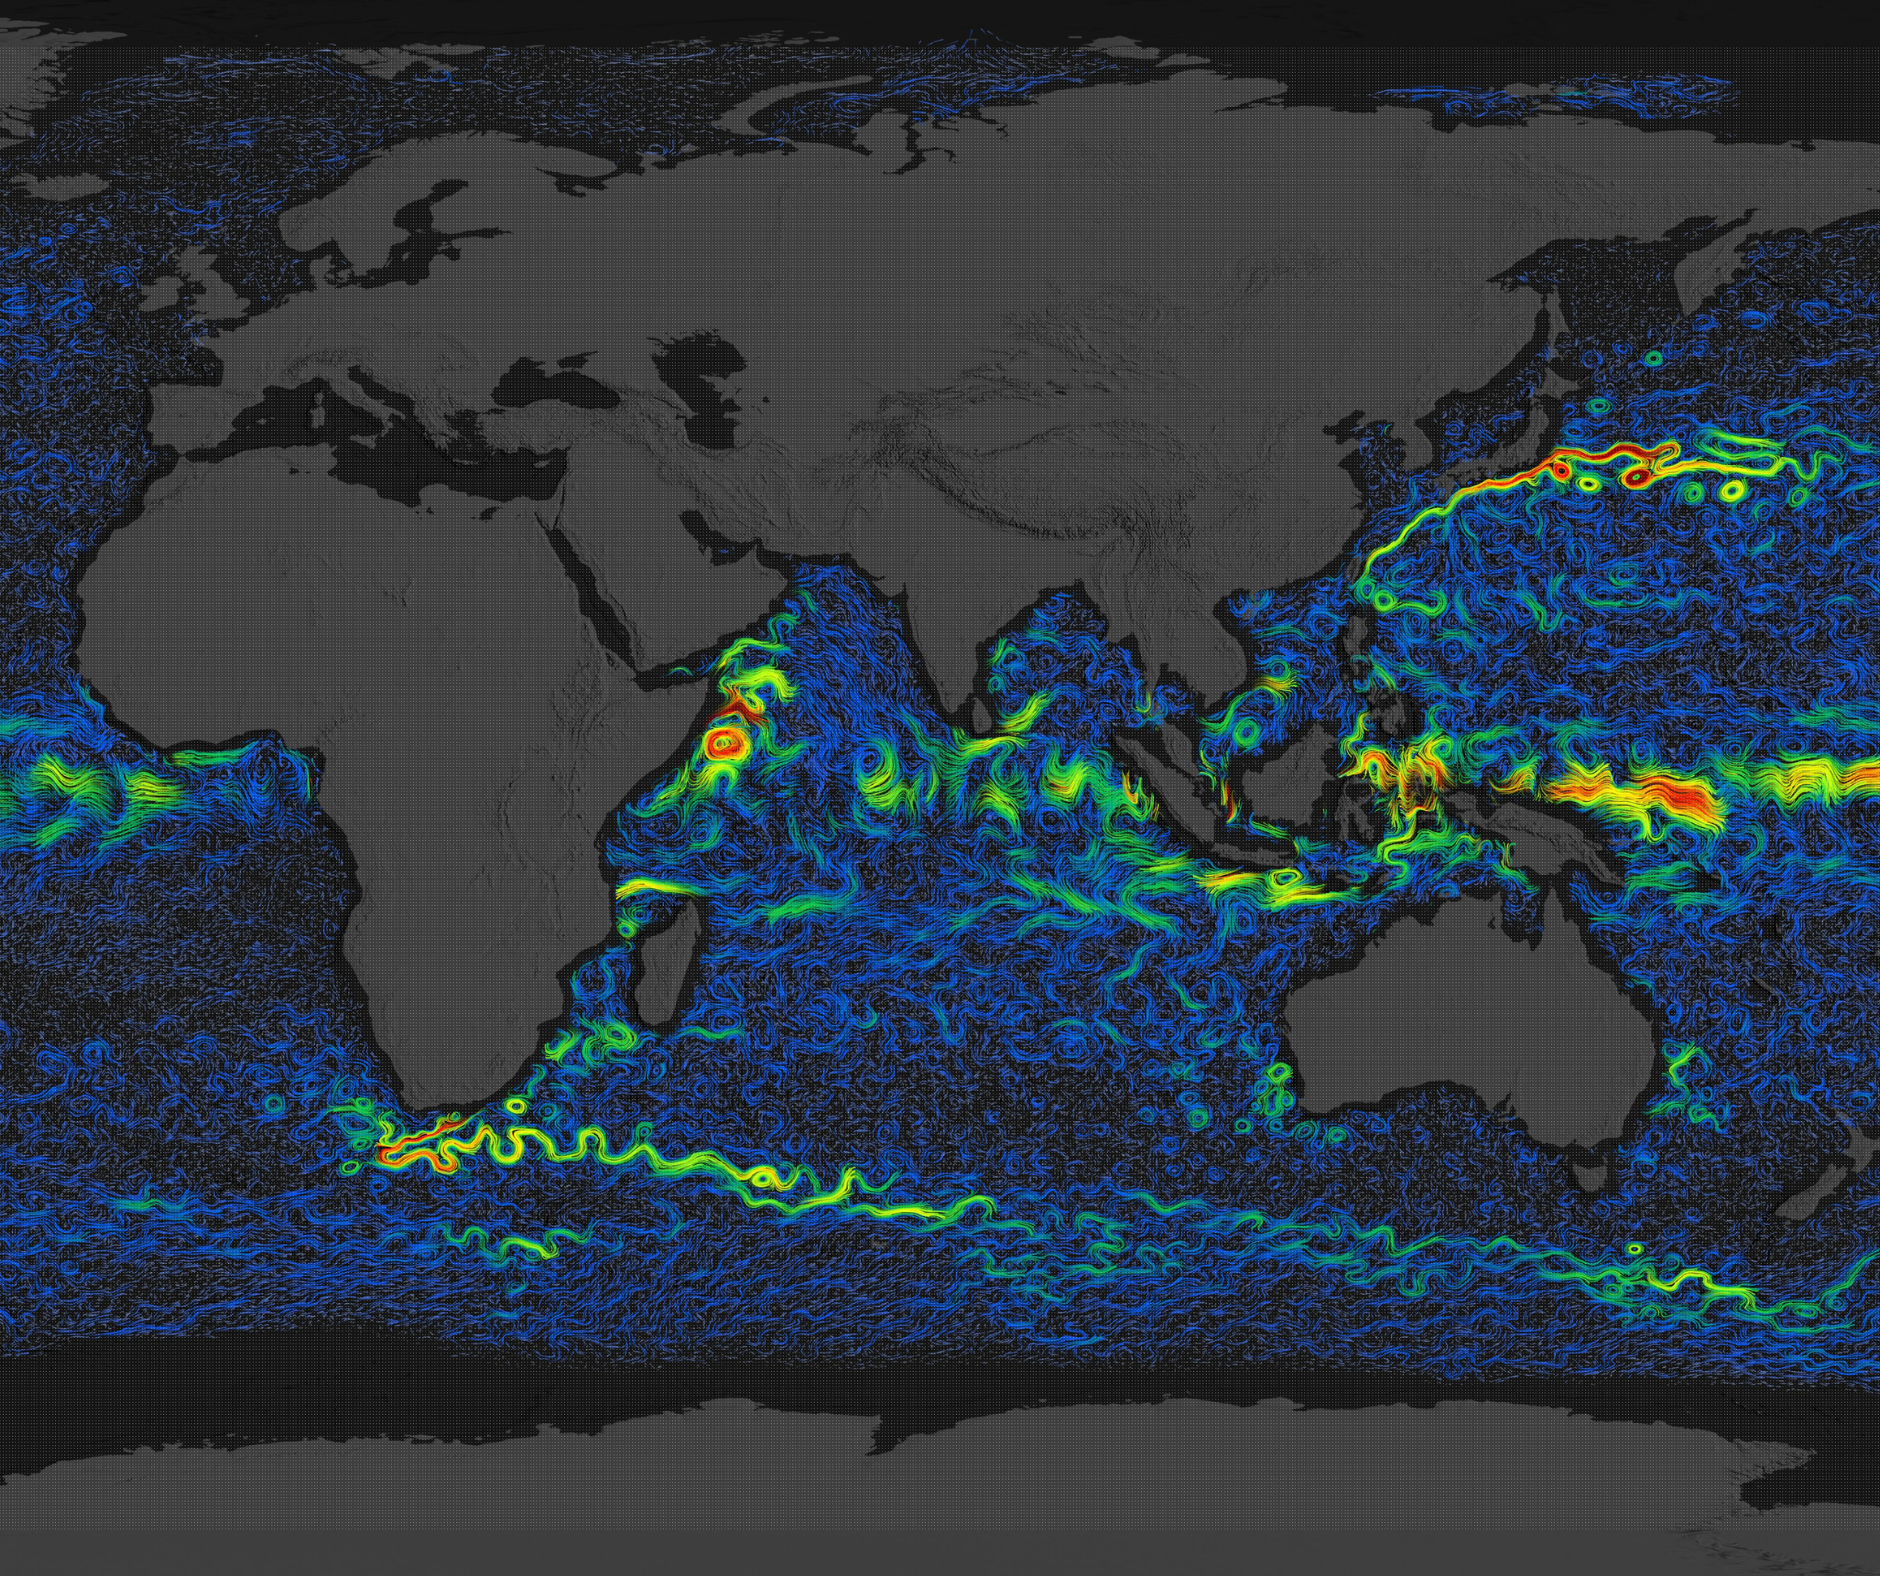 Shifting ocean currents are pushing more and more heat into the Southern Hemisphere’s cooler waters